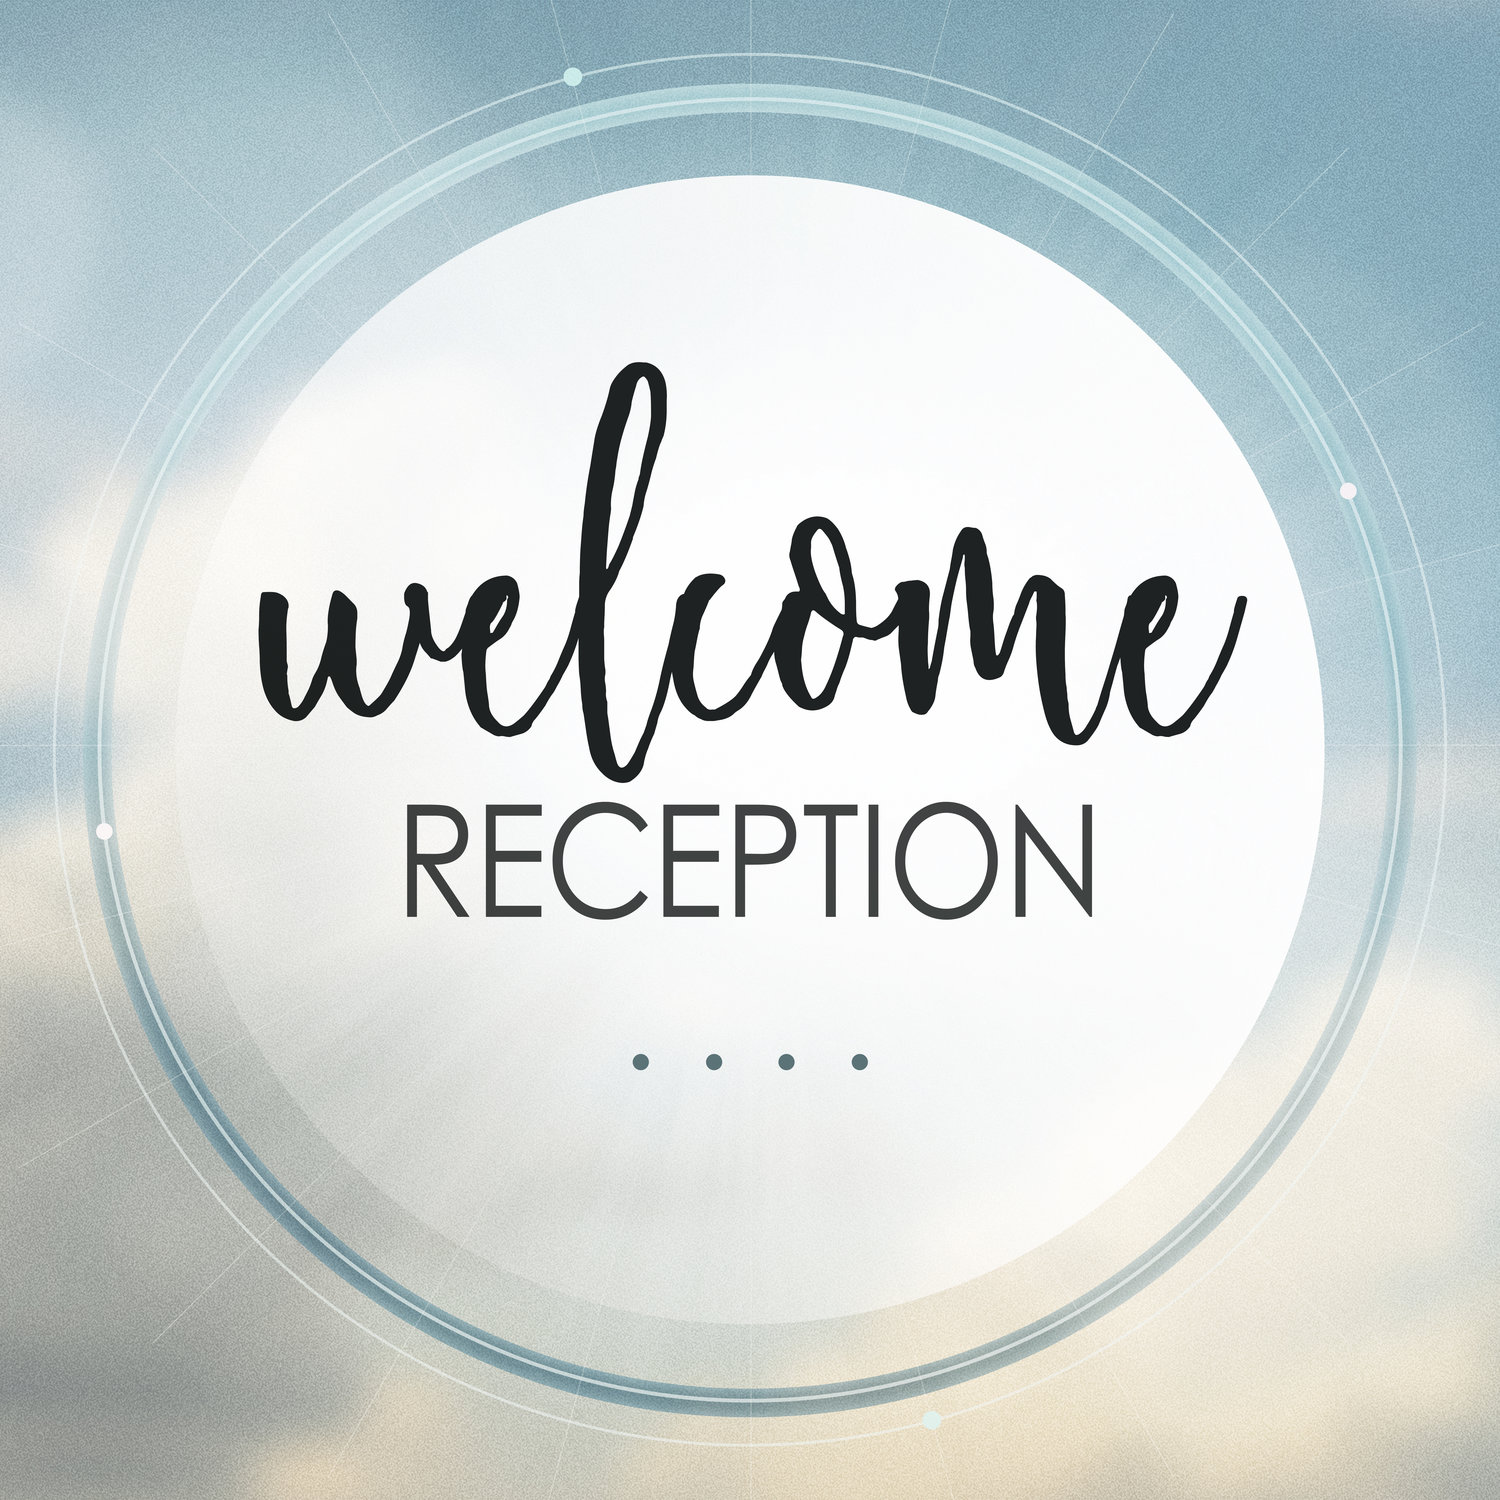 Father Mike Welcome Reception | St. Thomas Episcopal Church and School